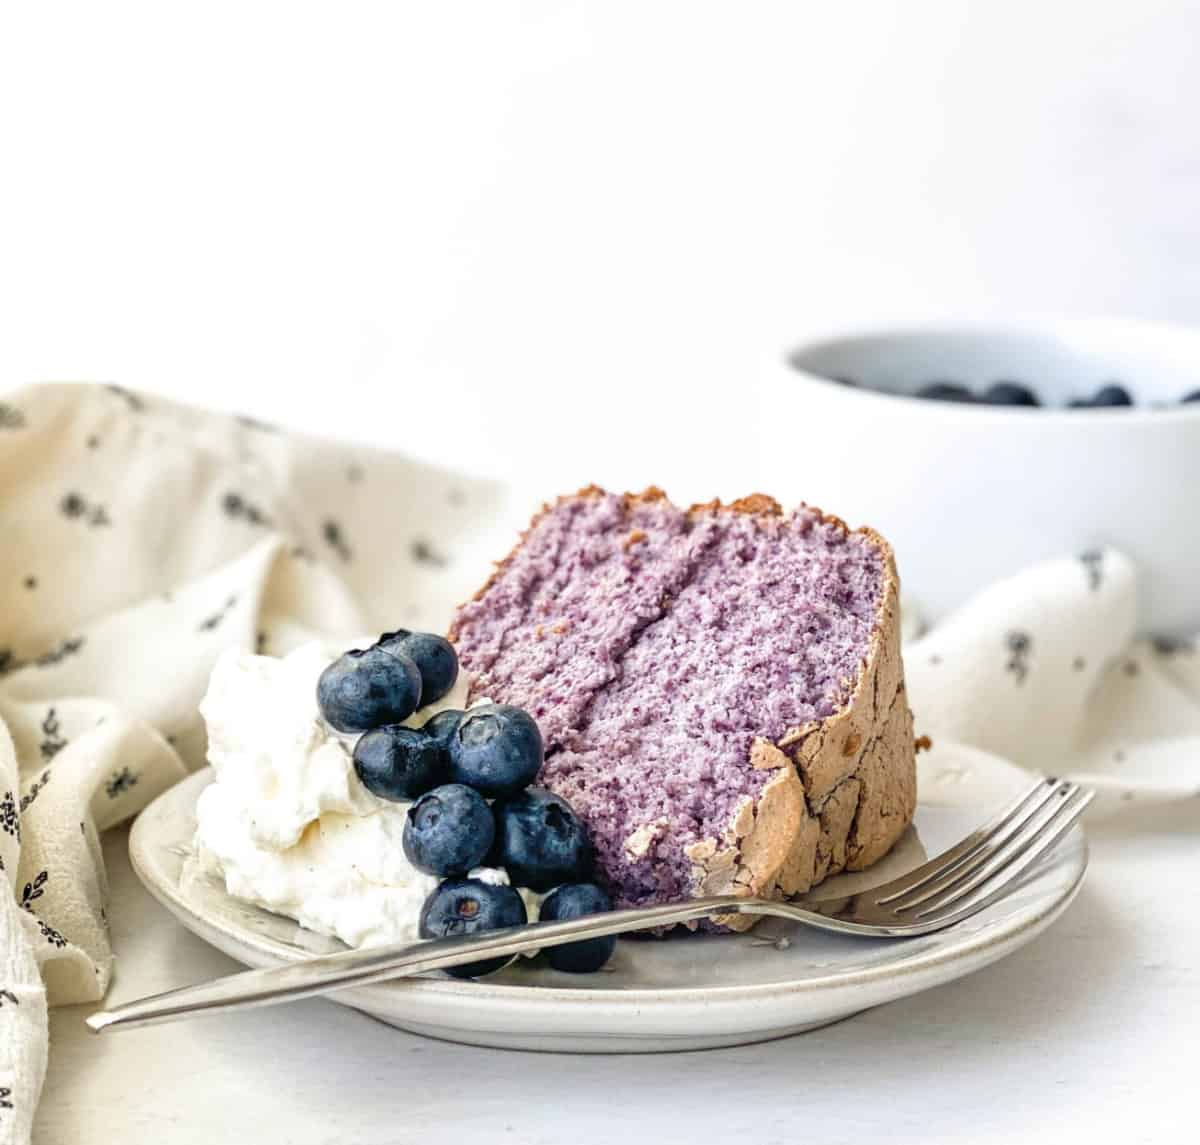 Slice of Blueberry Angel Food Cake with whipped cream and blueberries on a plate with a fork alongside.